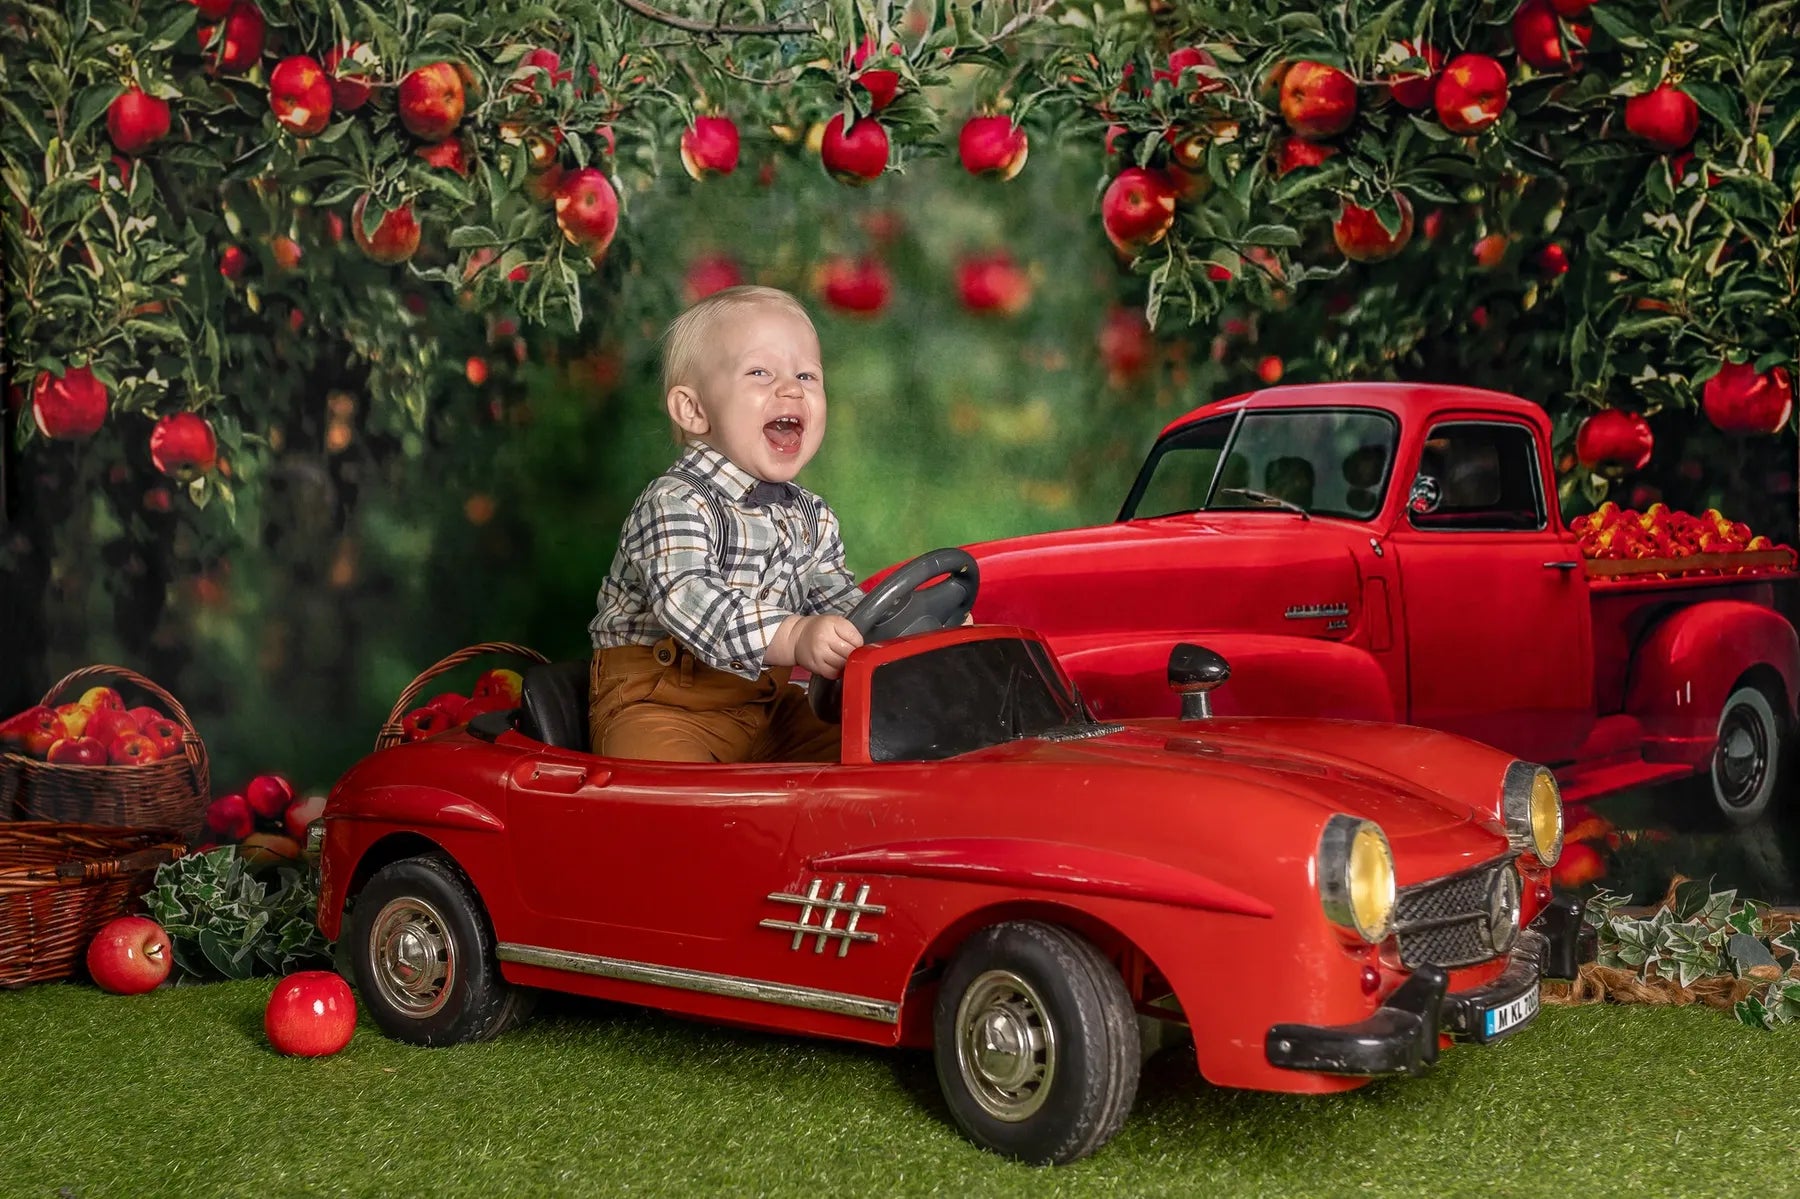 Kate Apple Orchard Red Truck Backdrop Designed by Rosabell Photography - Kate Backdrop